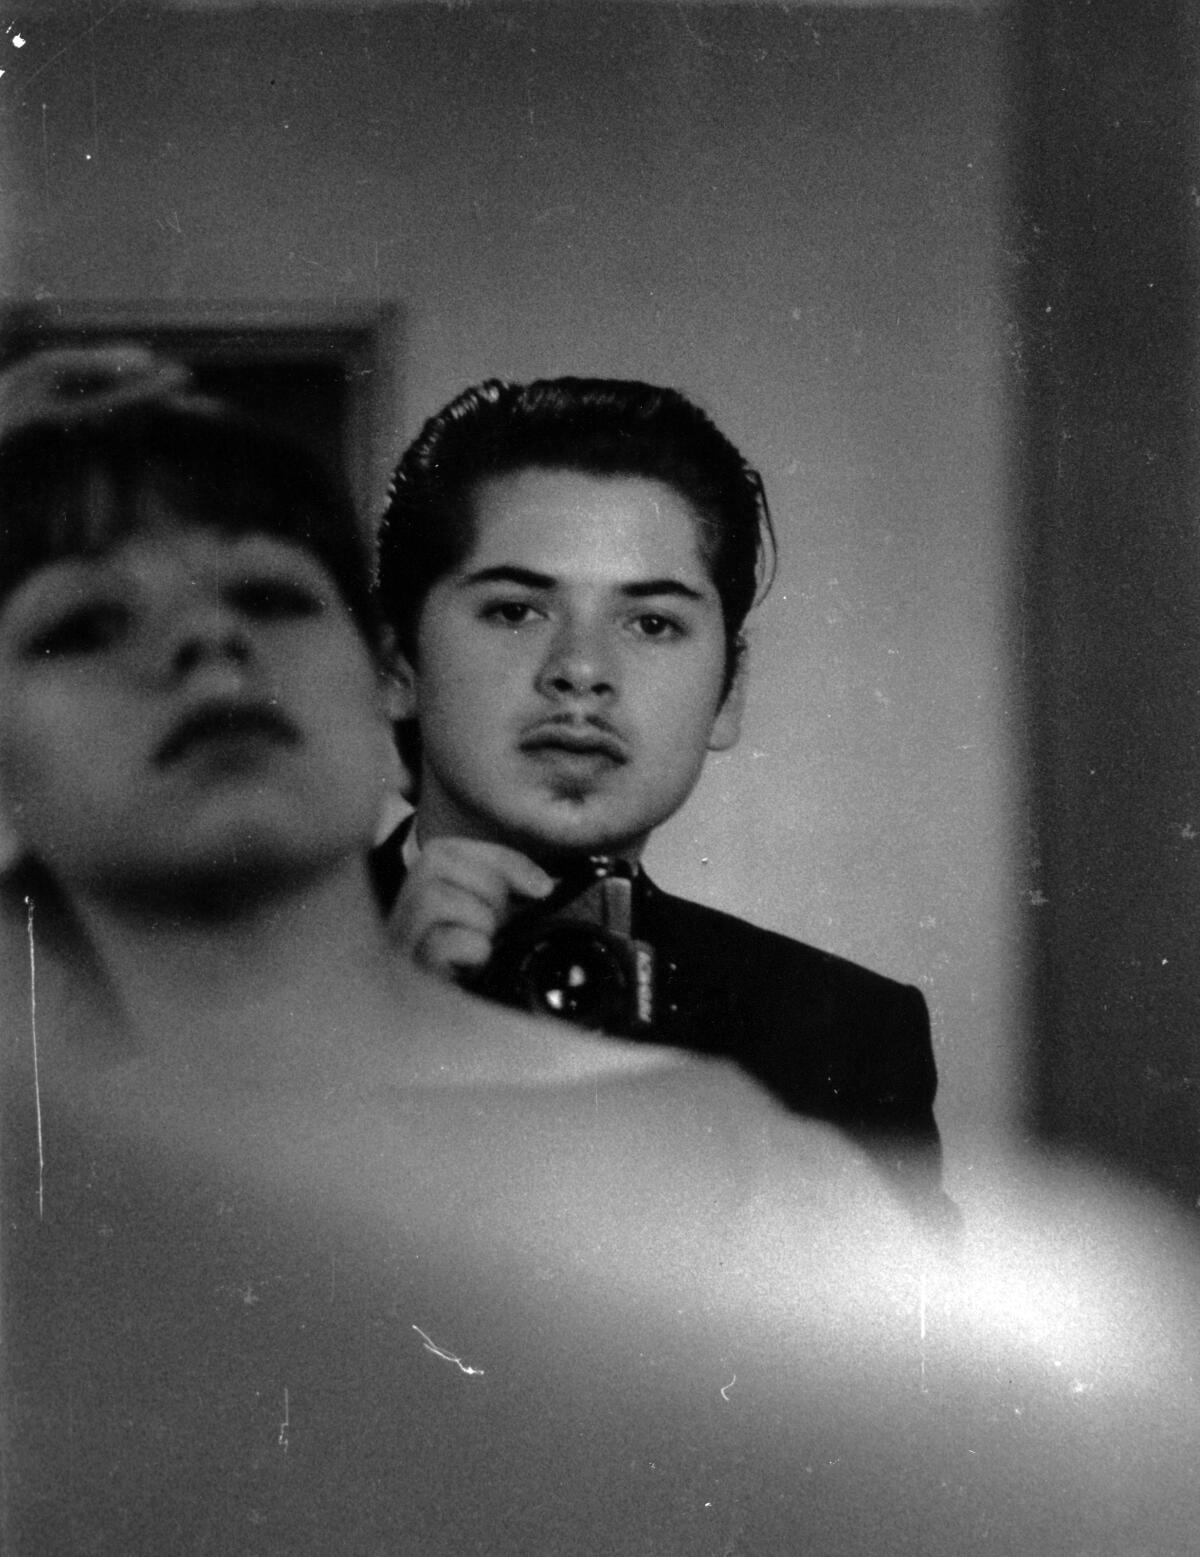 Photographer Reynaldo Rivera is seen in a mirror's reflection, photographing over his sister's shoulder